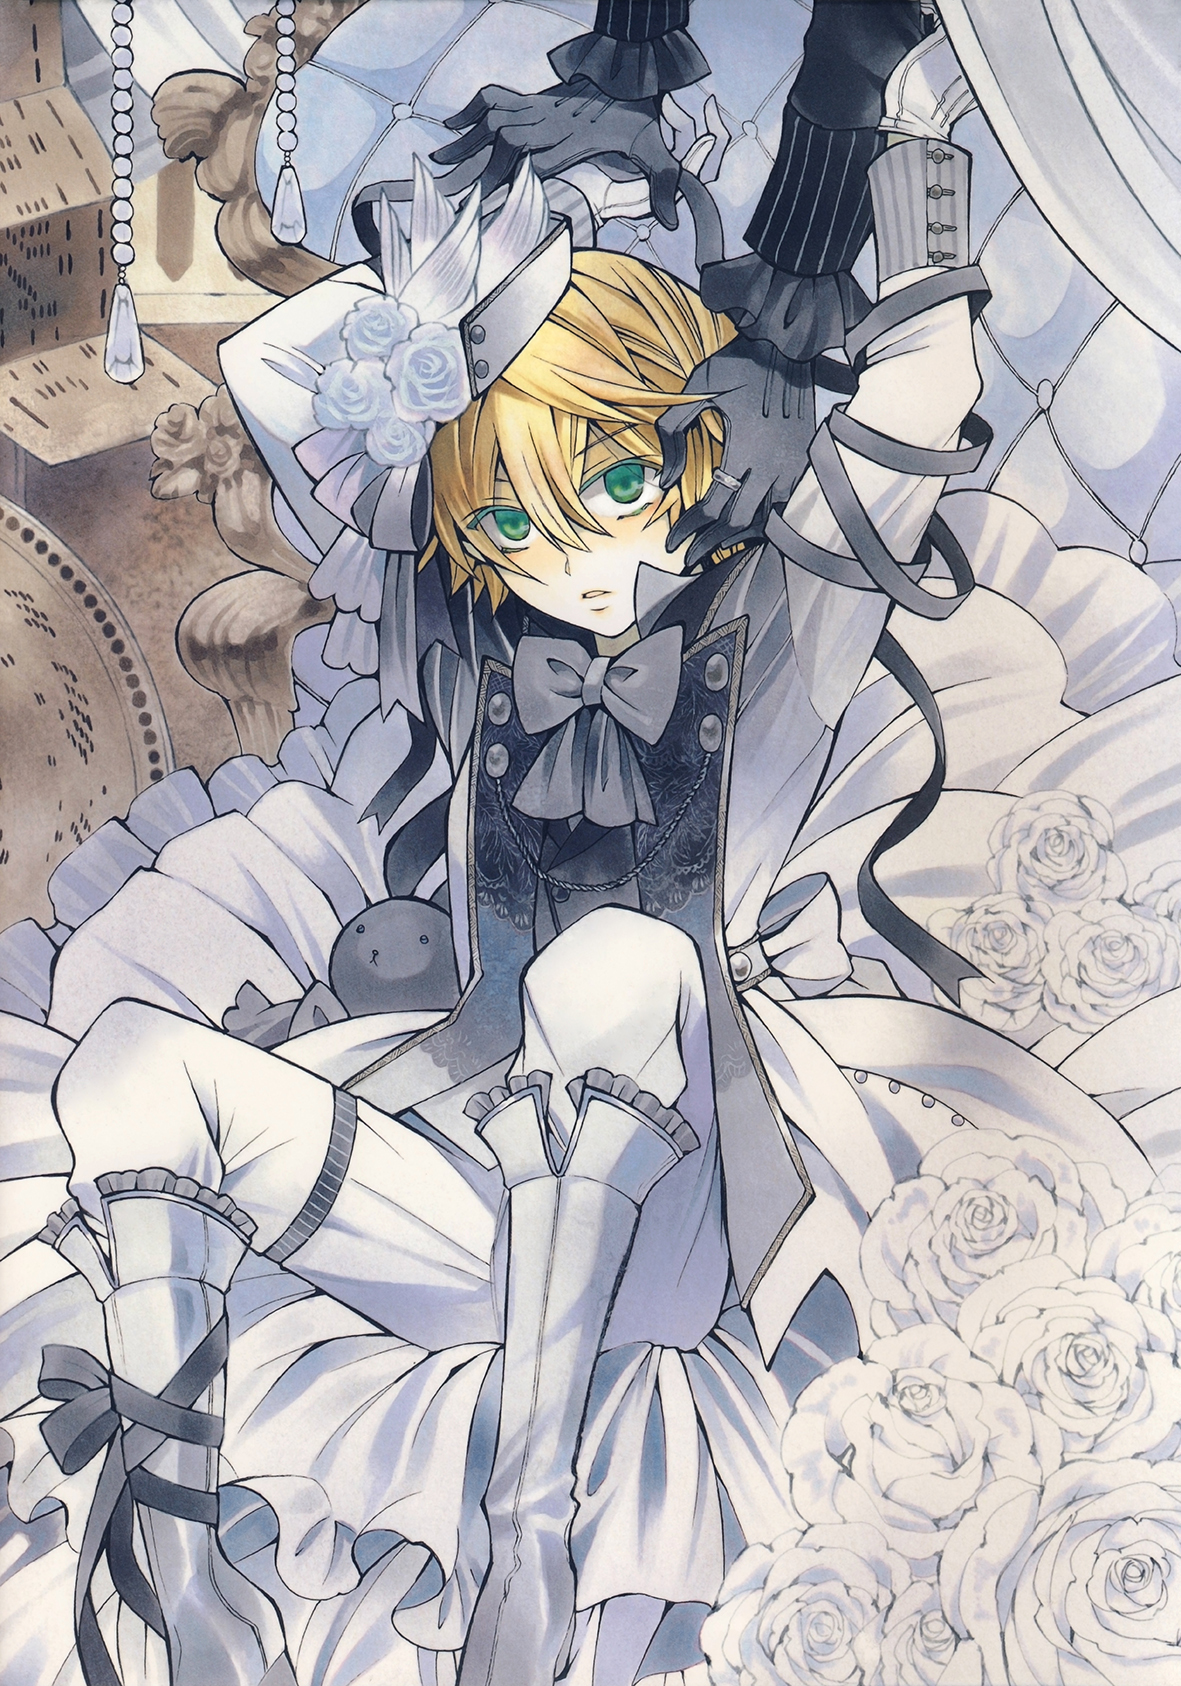 Pandora-Hearts odds-and-ends_001.jpg